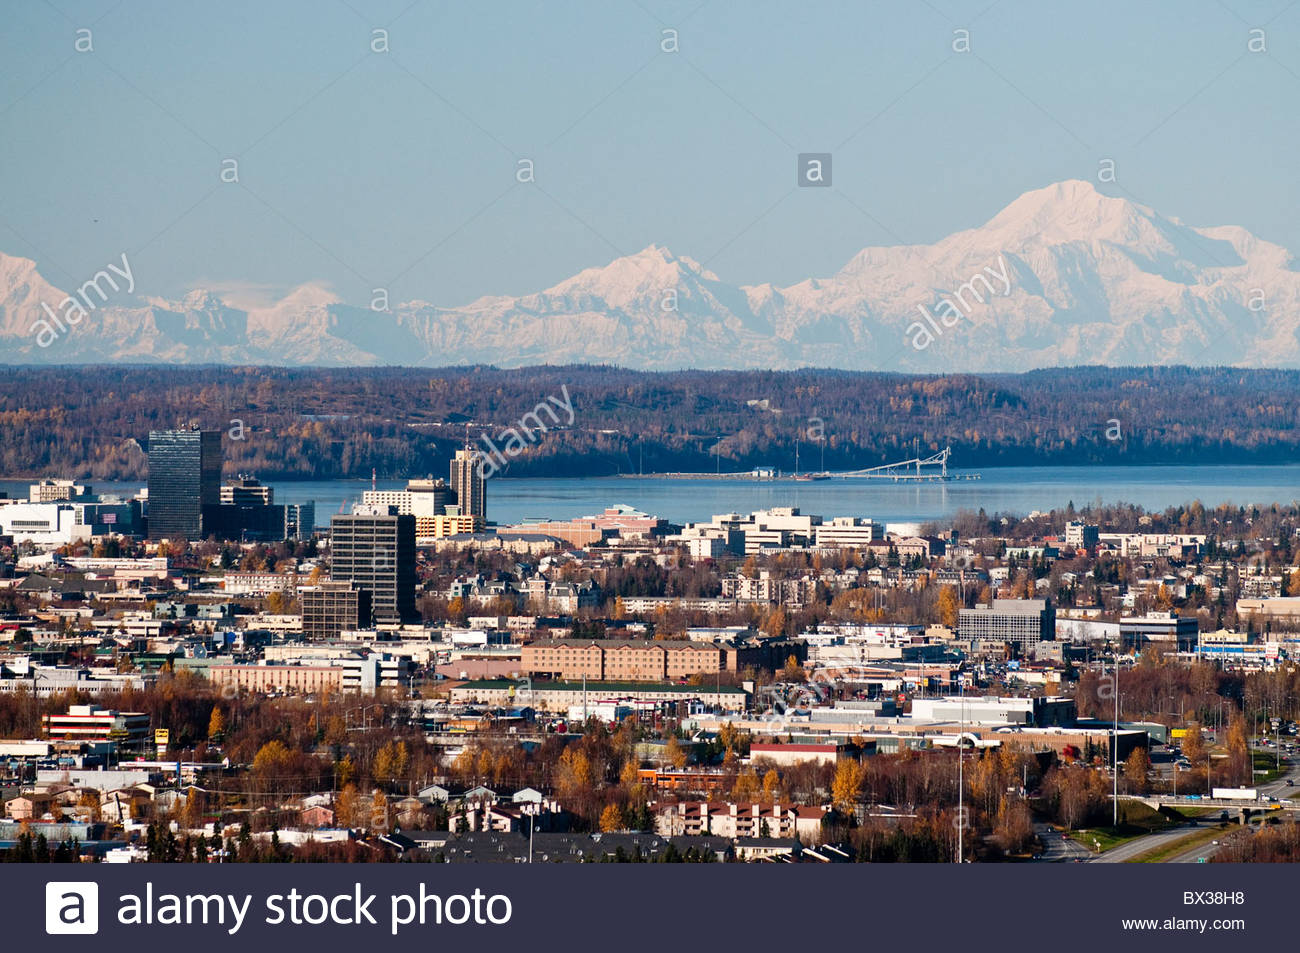 alaska-anchorage-has-a-stunning-view-of-